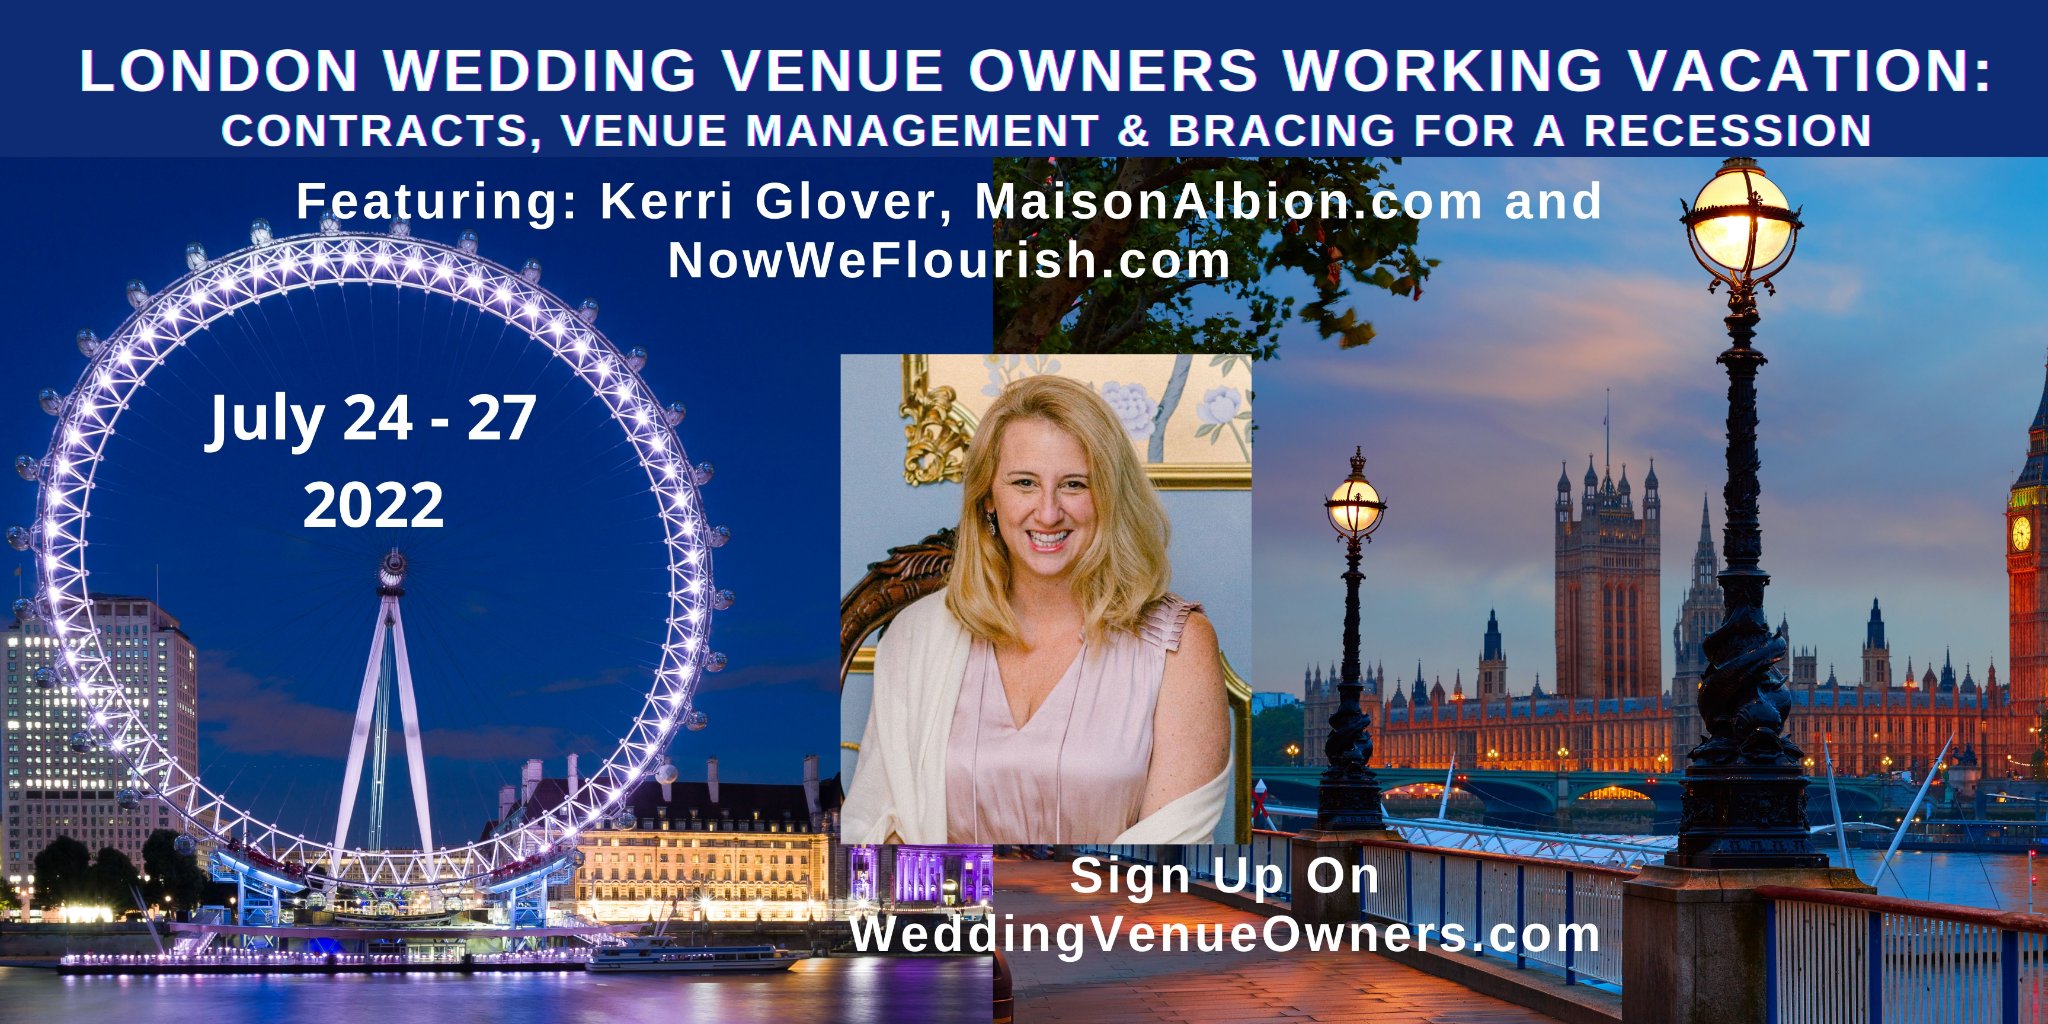 LONDON Wedding Venue Owners Working Vacation